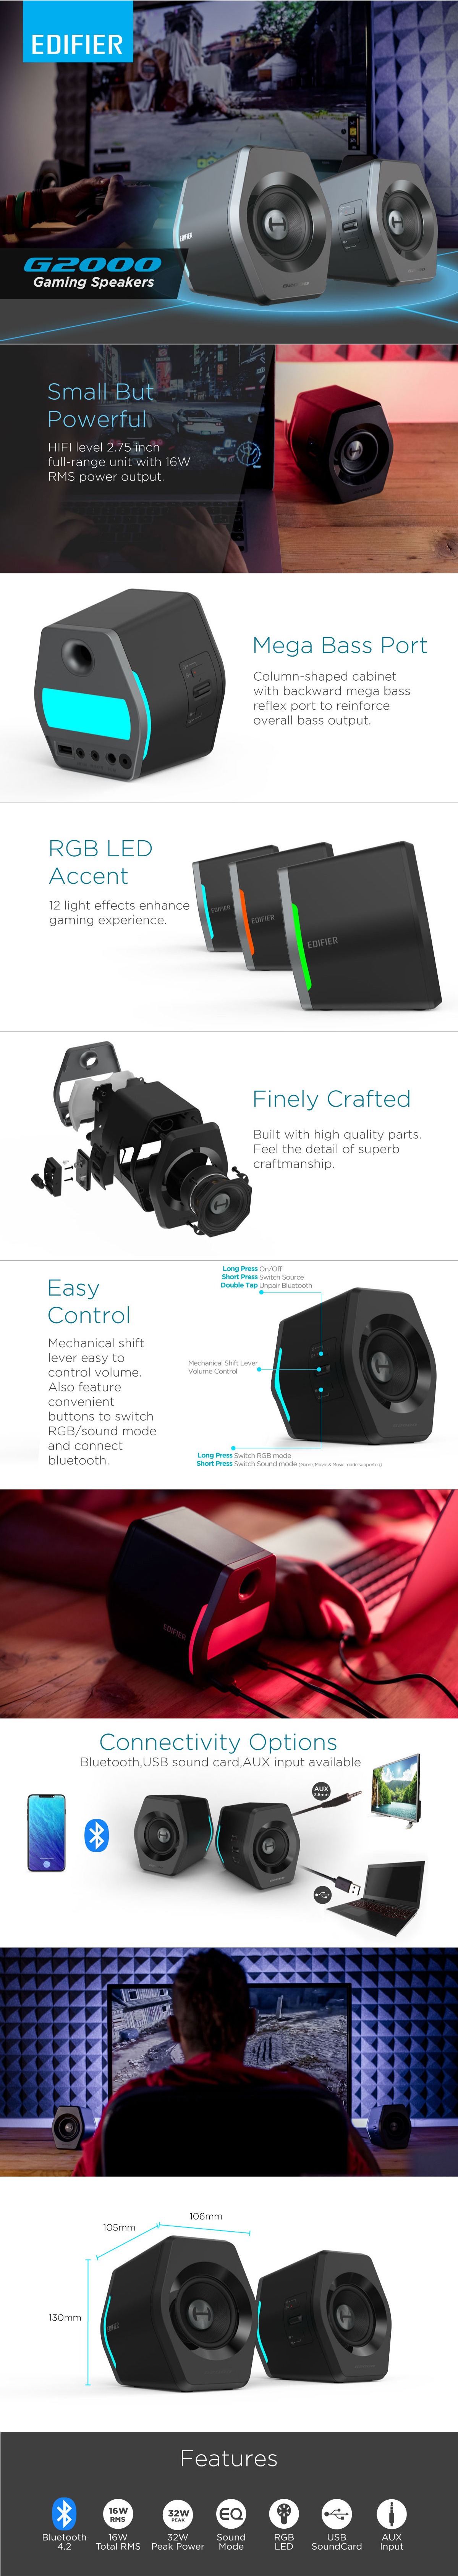 A large marketing image providing additional information about the product Edifier G2000 2.0 Bluetooth Gaming Speakers - Black - Additional alt info not provided